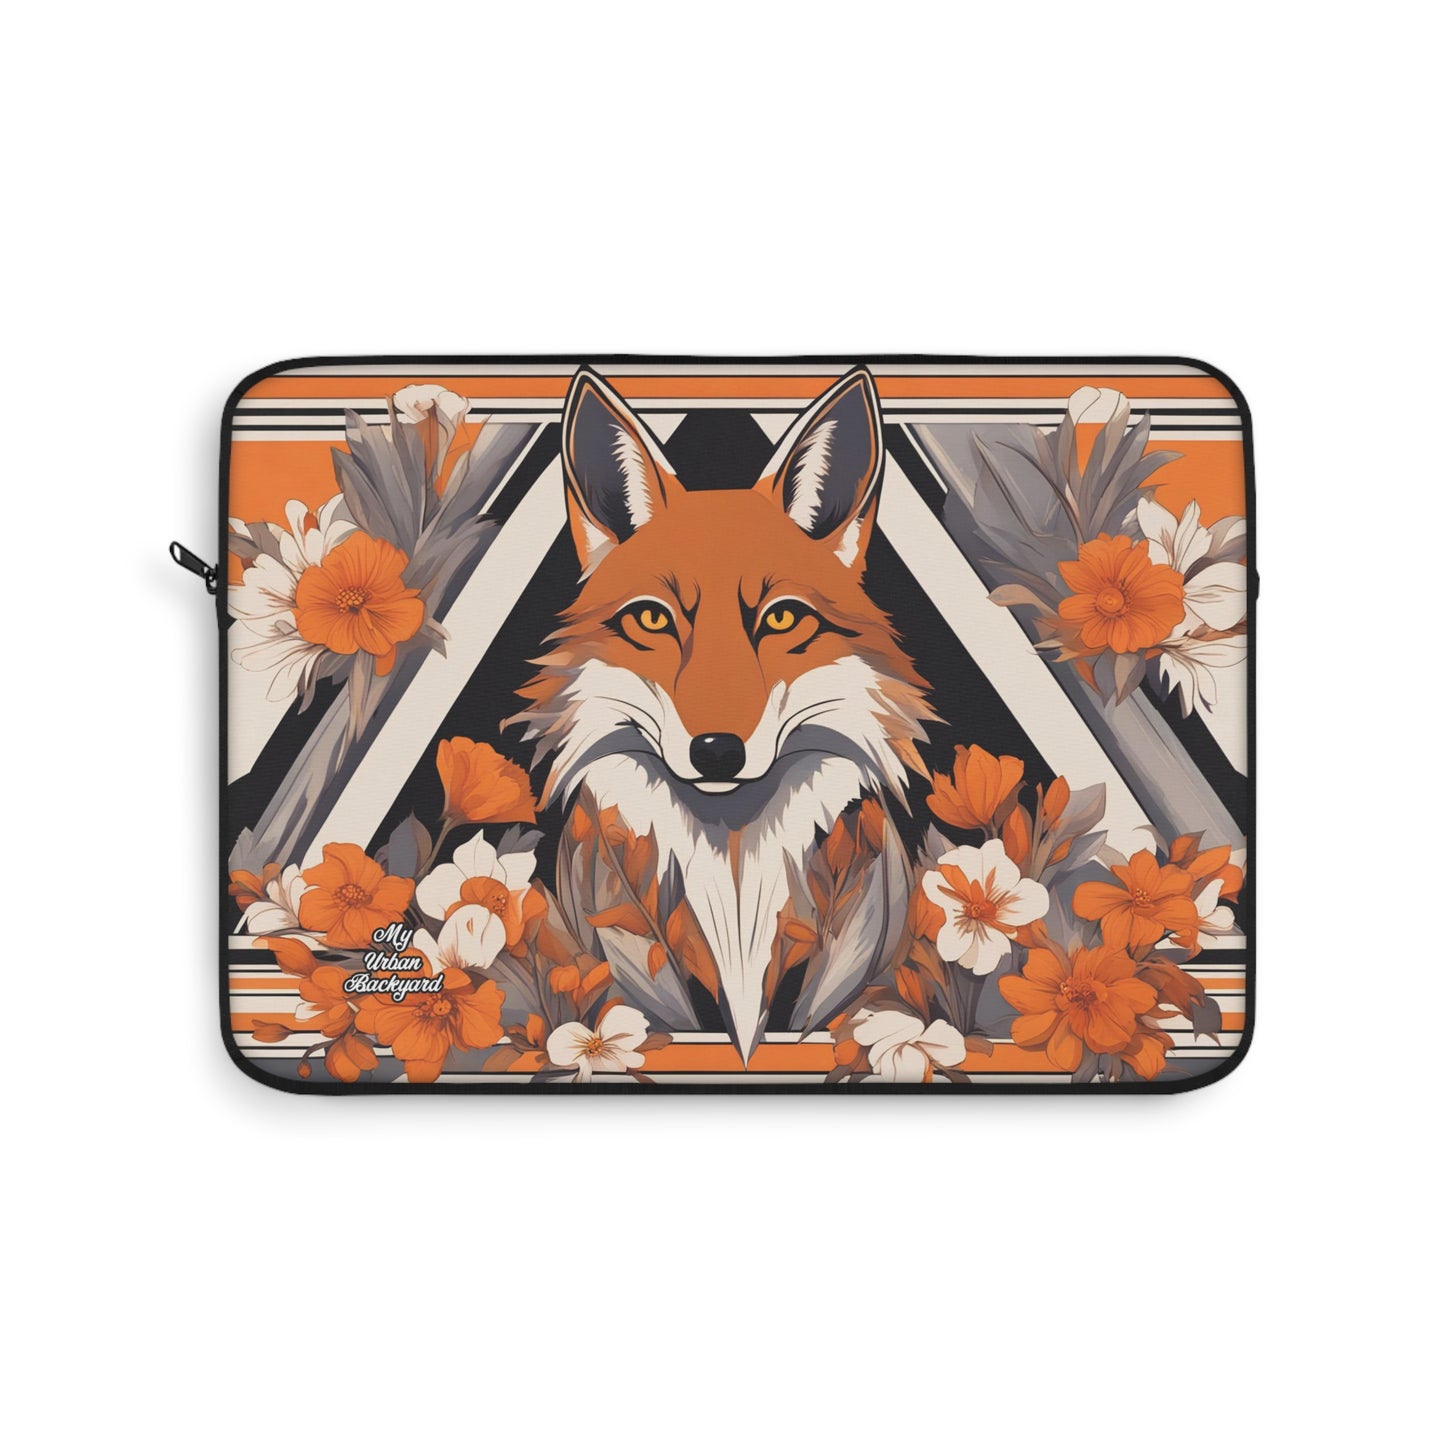 Brown Urban Coyote, Laptop Carrying Case, Top Loading Sleeve for School or Work